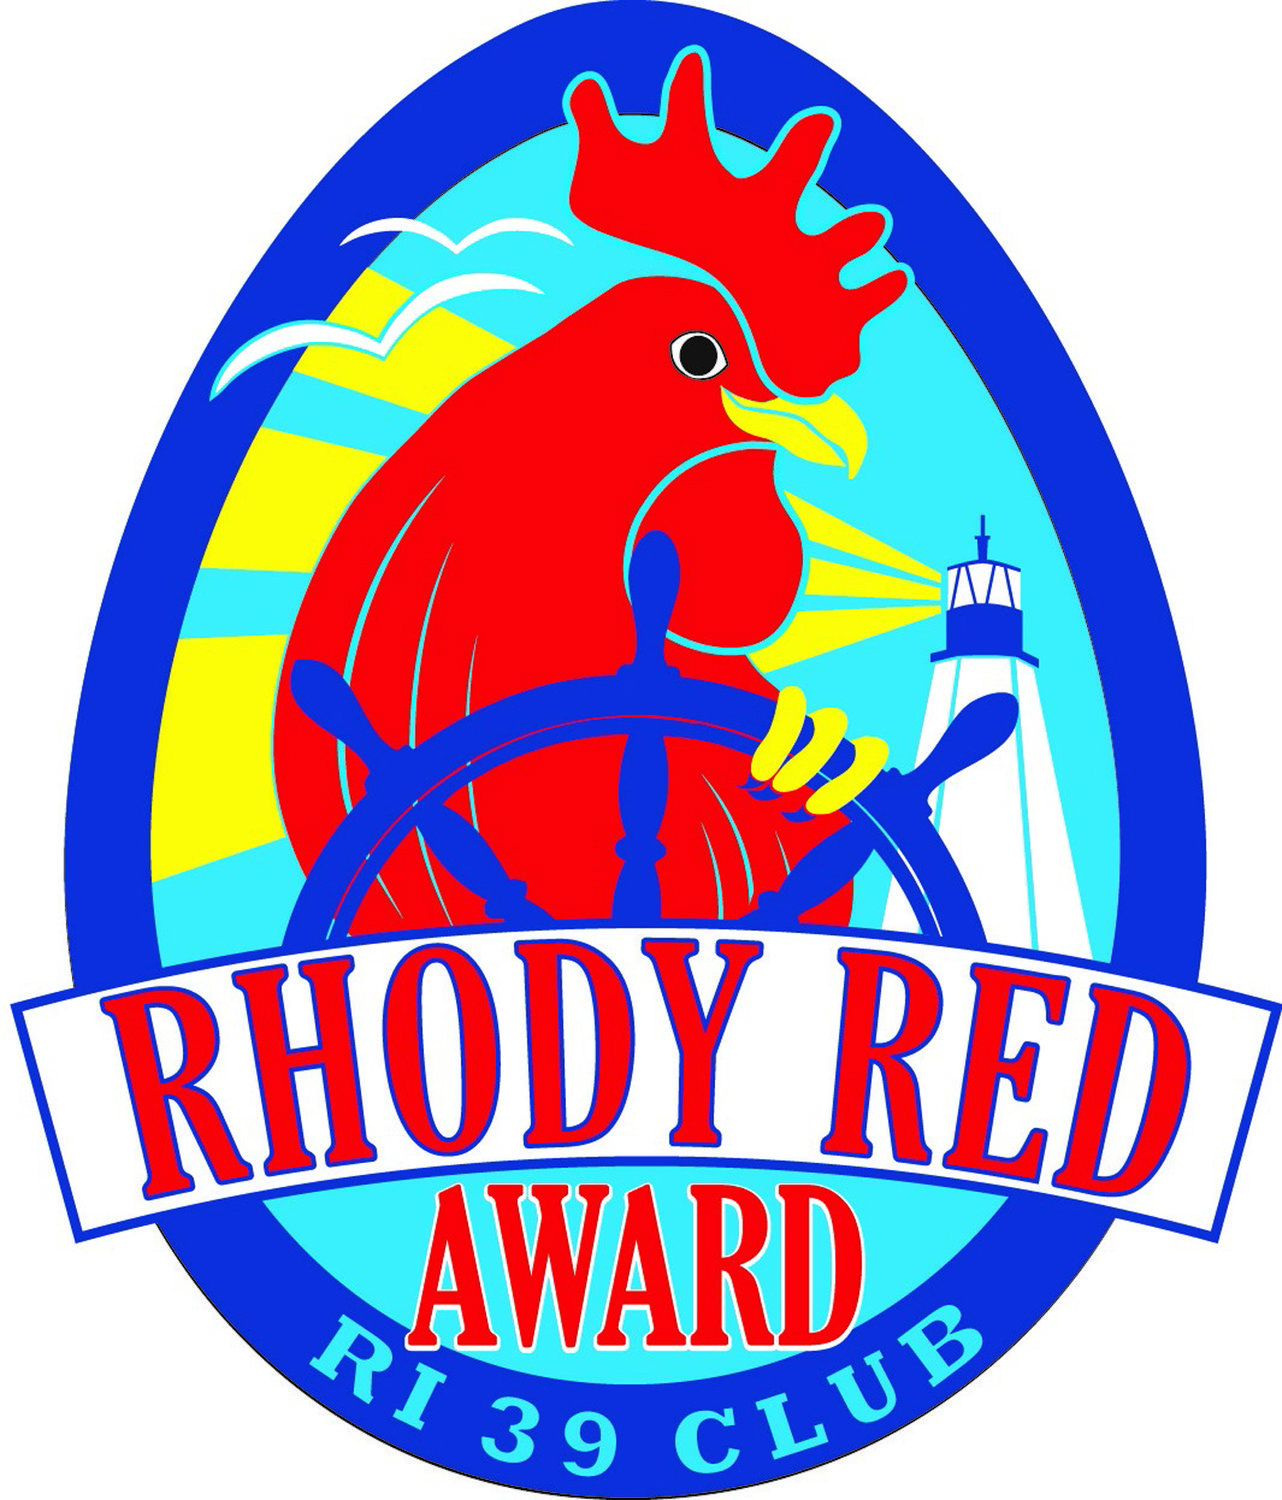 RHODY RED: Readers who make it to all of Rhode Island’s 39 cities and towns – getting their book signed or stamped along the way – will be honored with the Rhody Red Award patch at an annual dinner.